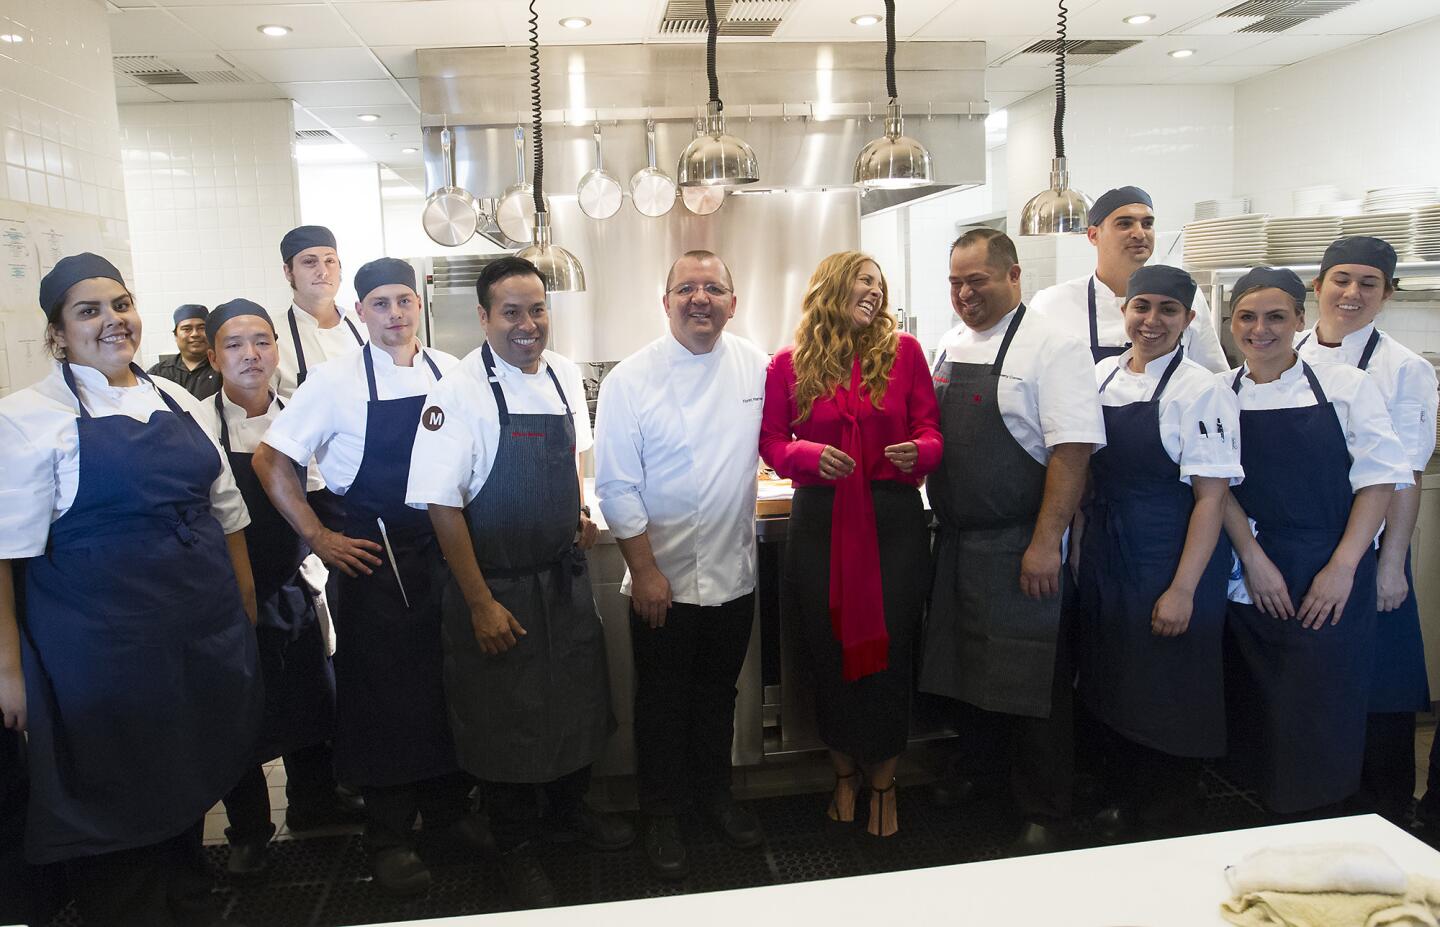 The kitchen staff stands with chefs and owners Florent and Amelia Marneau, center, during the grand opening preview of Marché Moderne restaurant in Crystal Cove Shopping Center in Newport Beach.